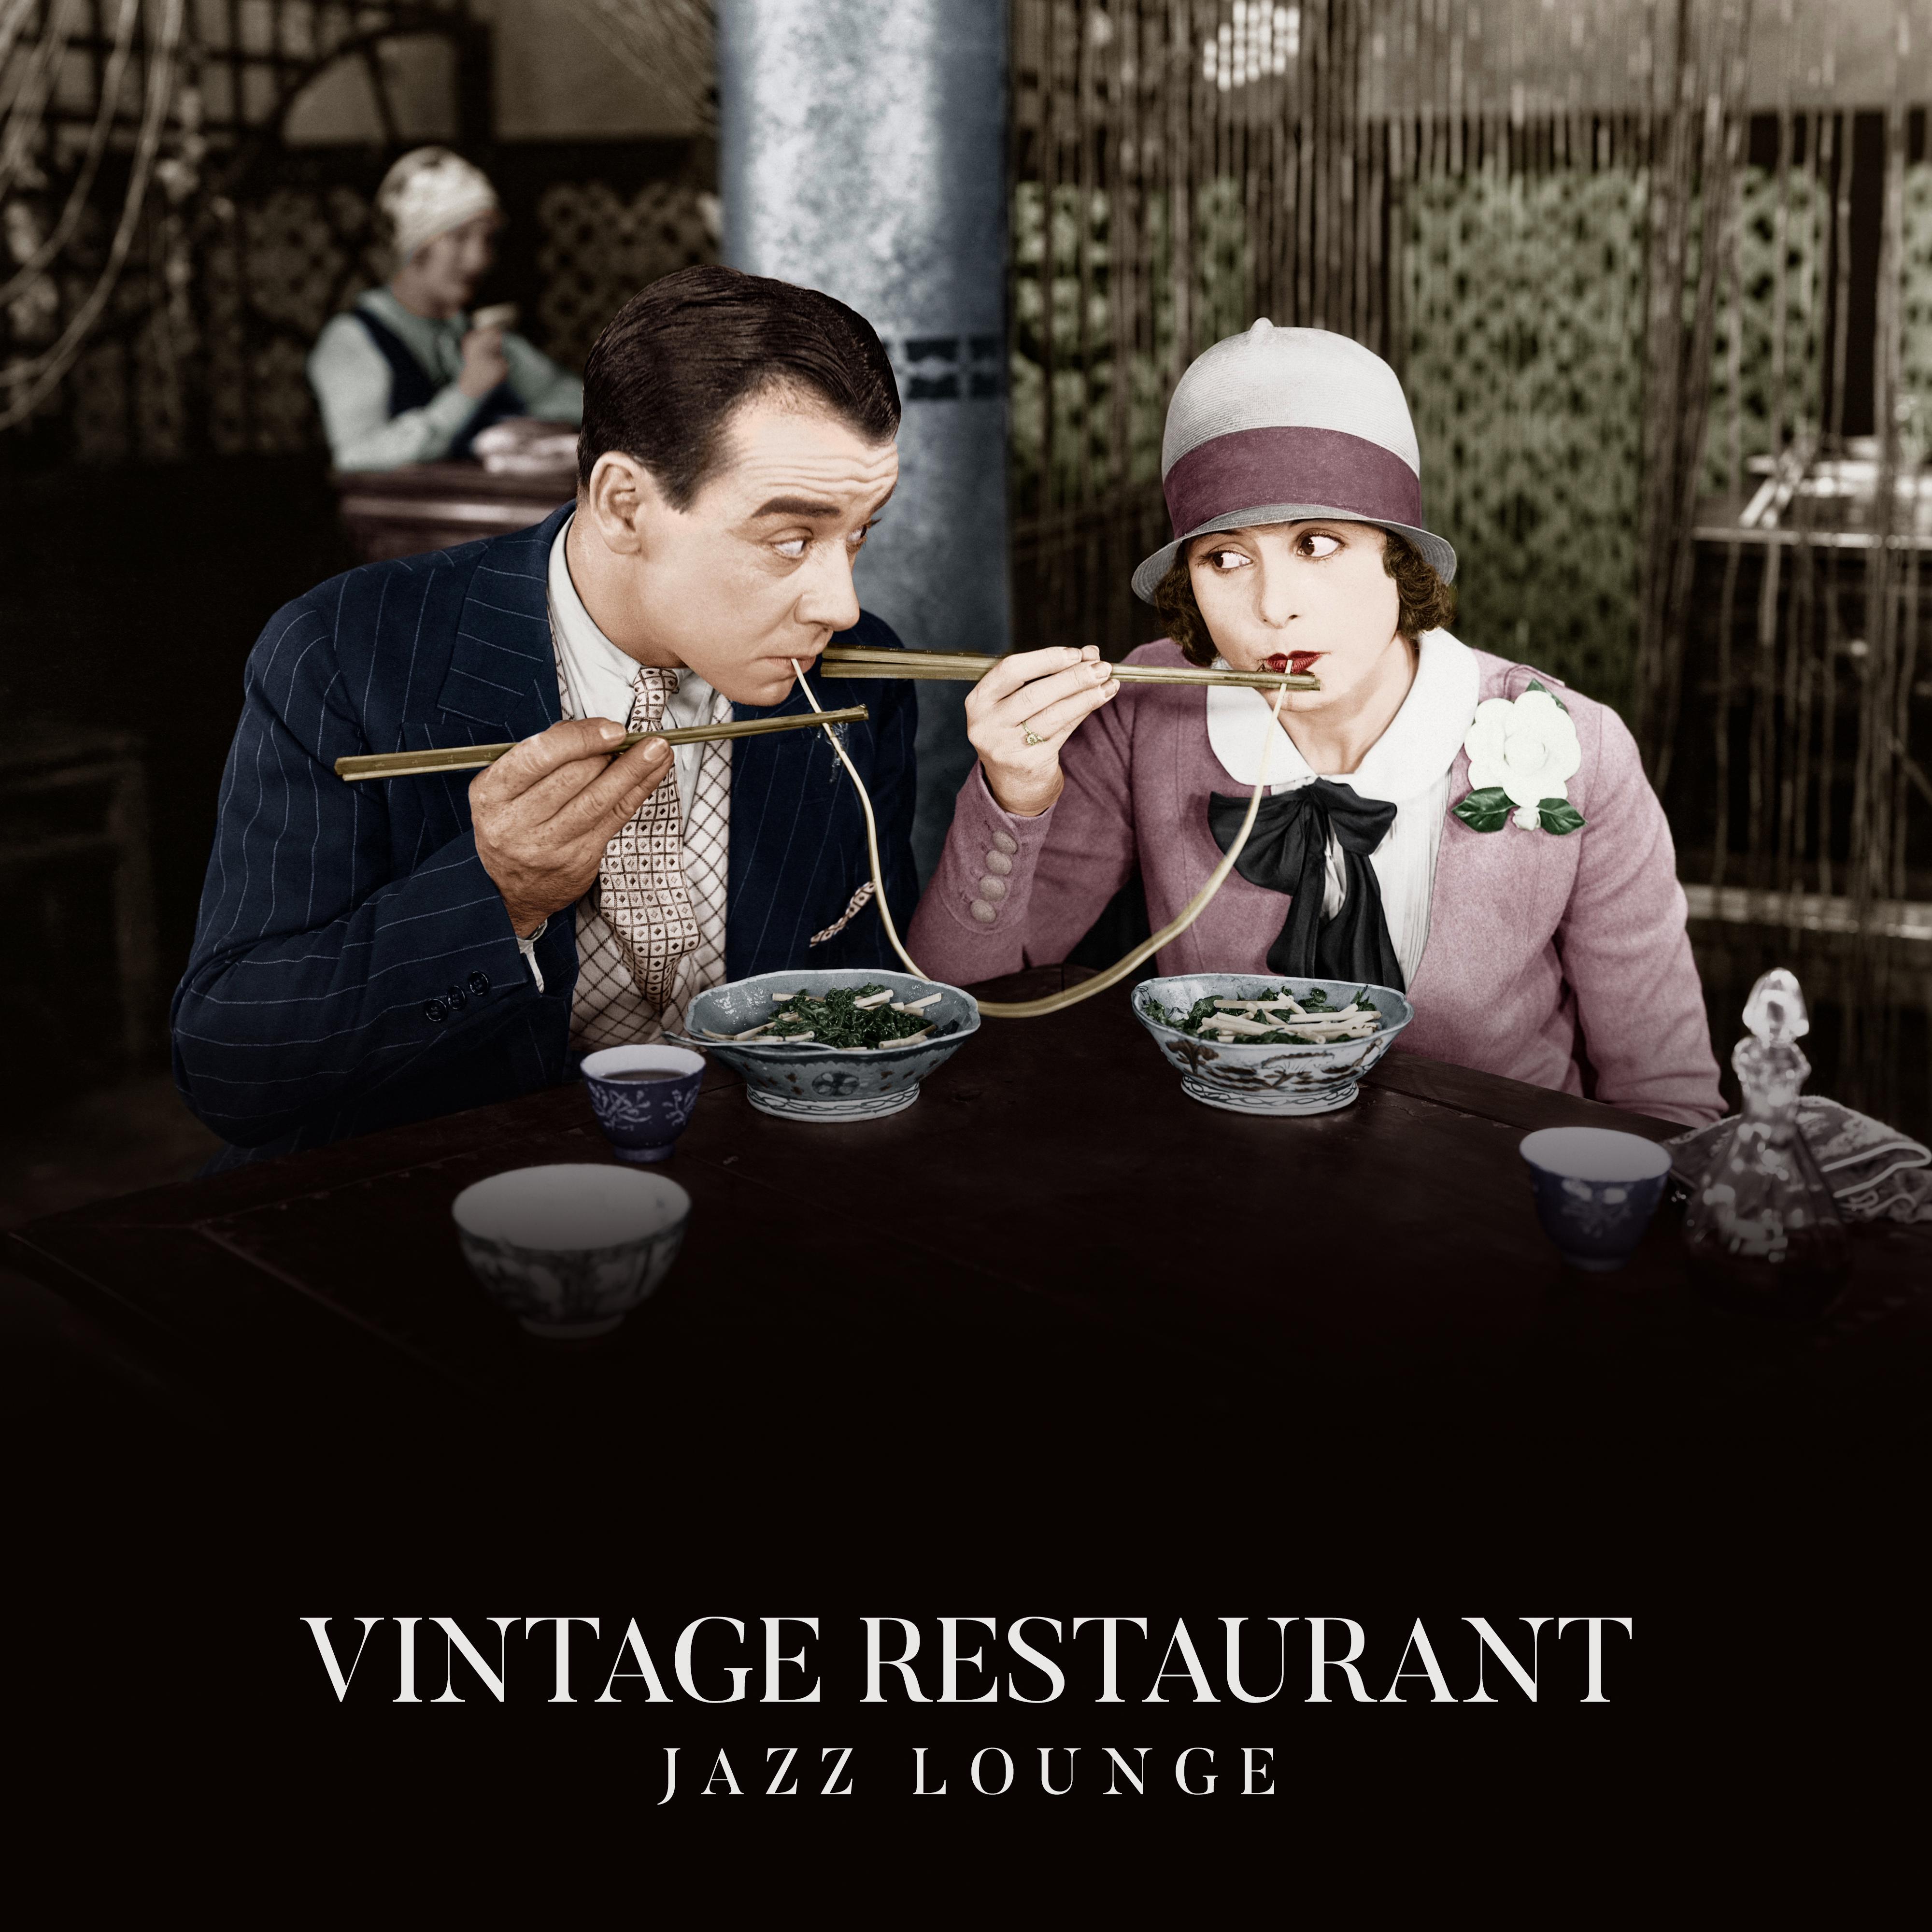 Vintage Restaurant Jazz Lounge: 15 Background Smooth Jazz Melodies Ideal for Nice Time Spending with Family